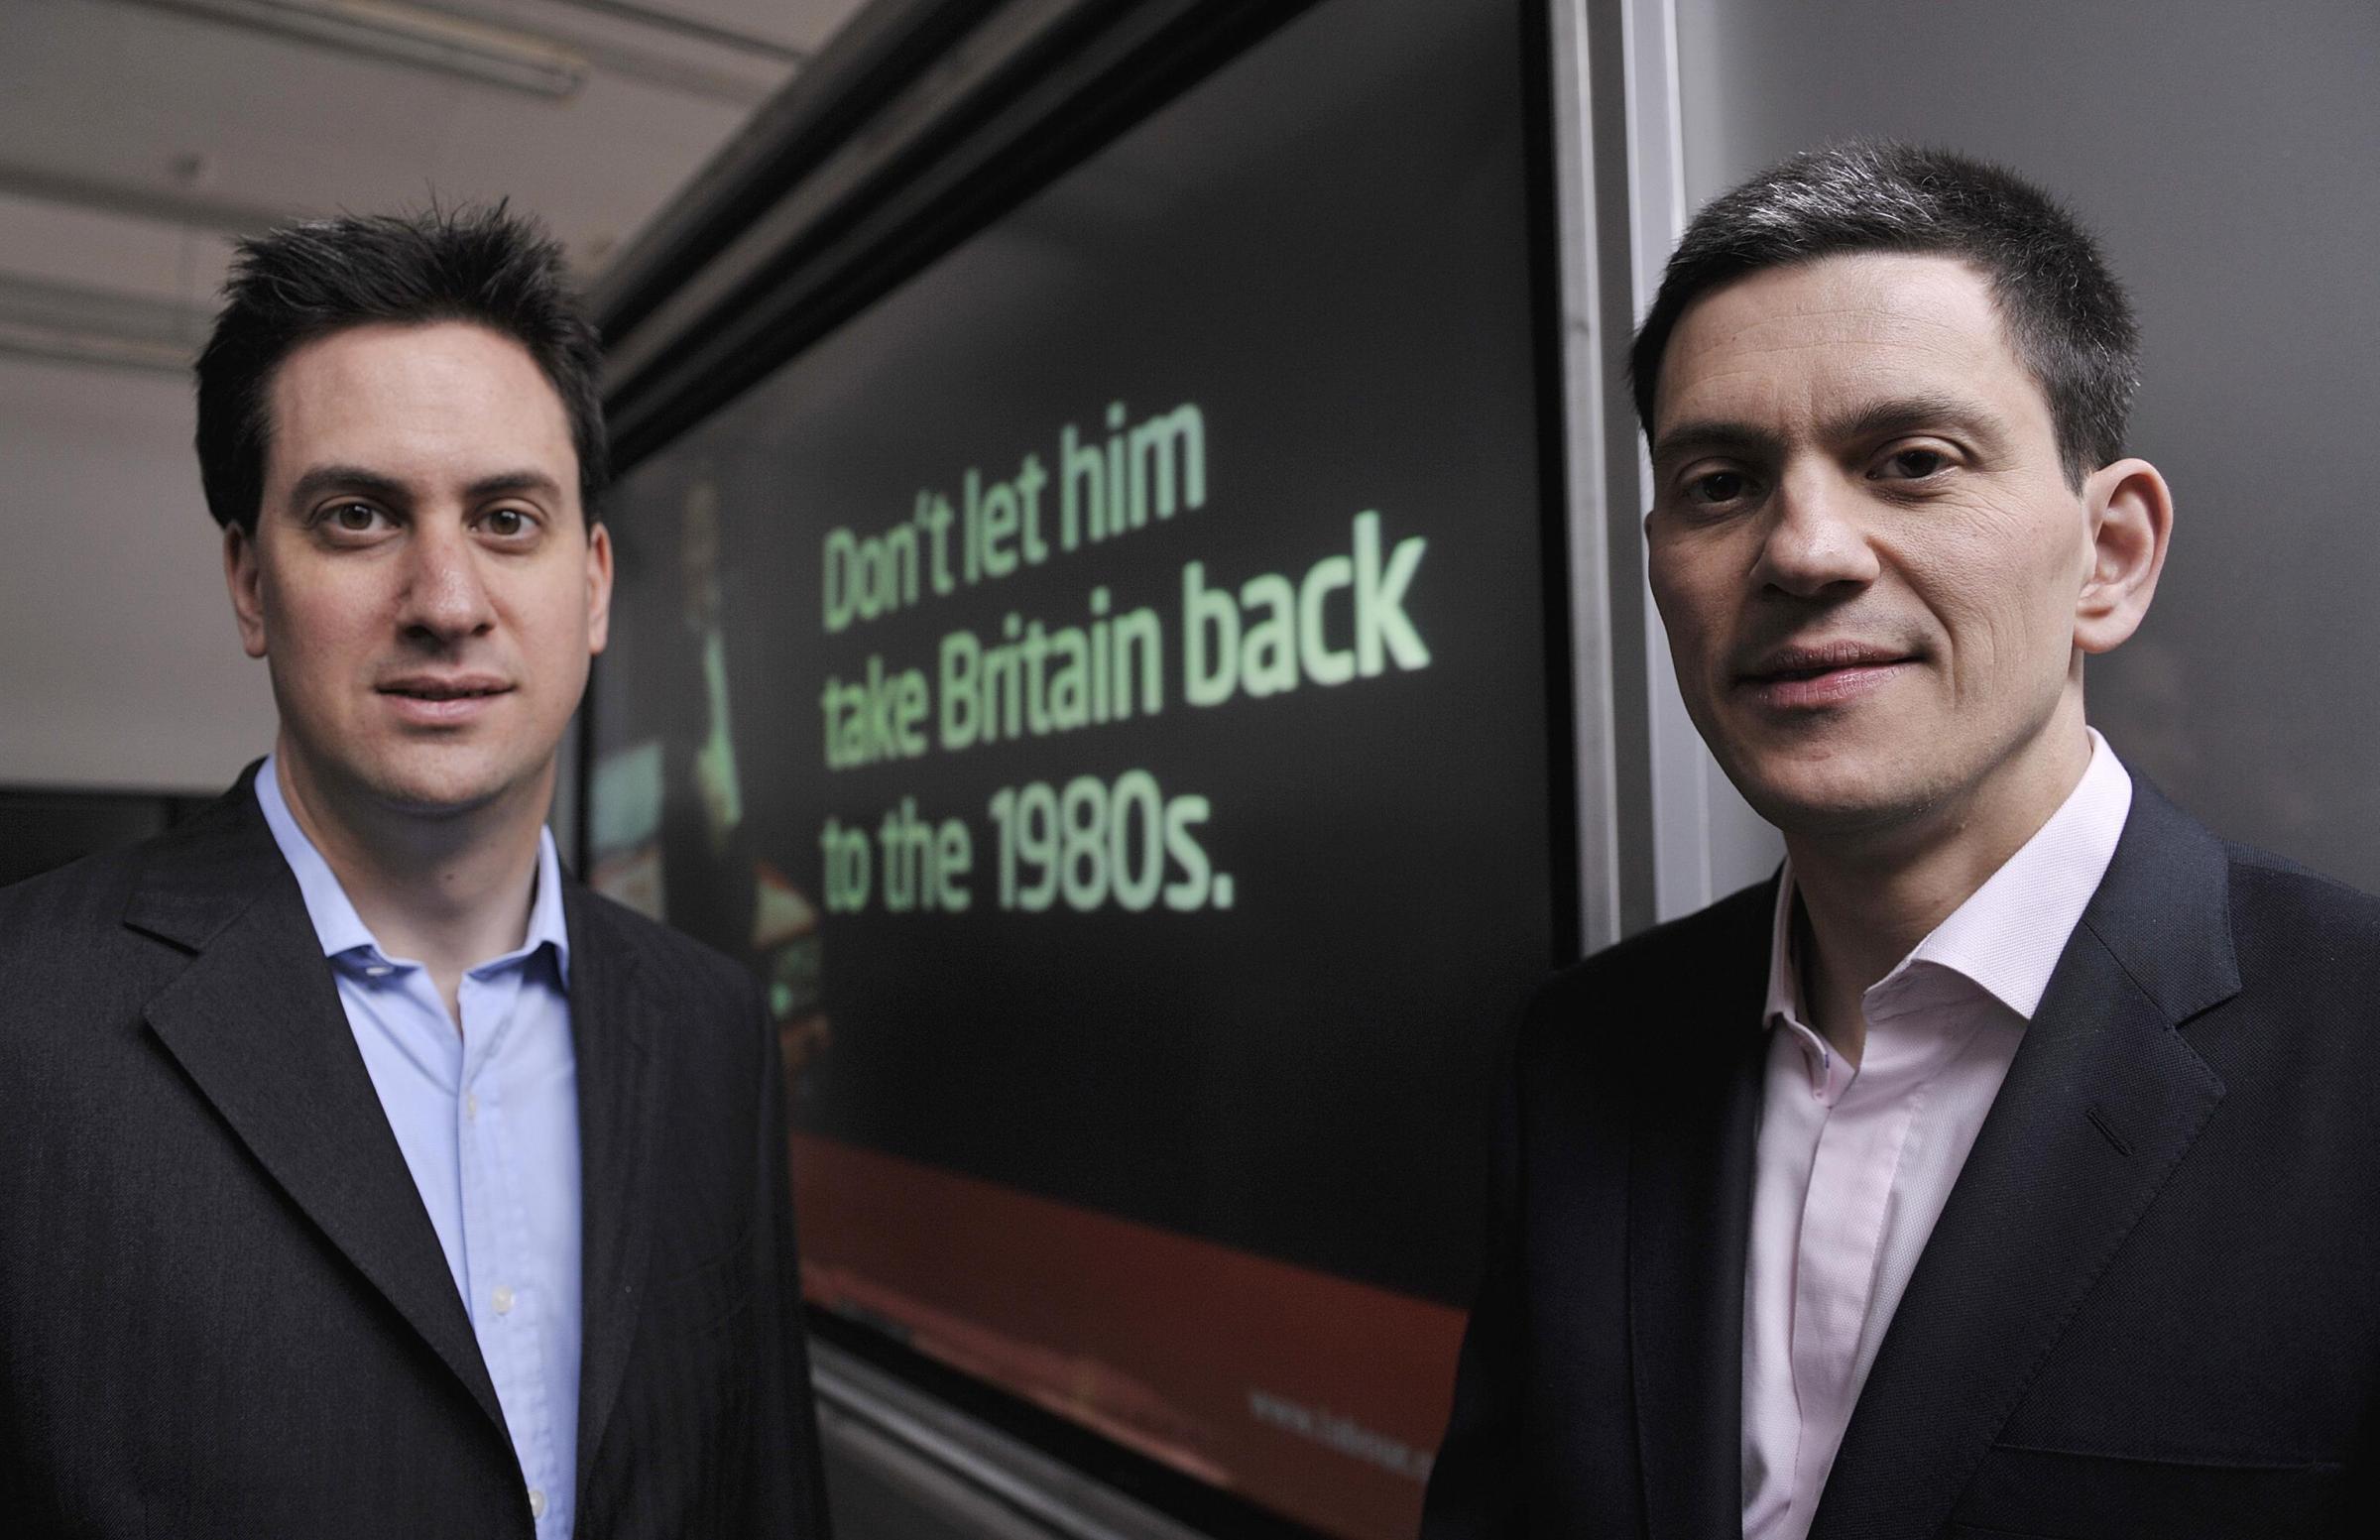 Brothers - Ed and David Miliband during the launch of Labours latest poster campaign in Basildon more than a decade ago